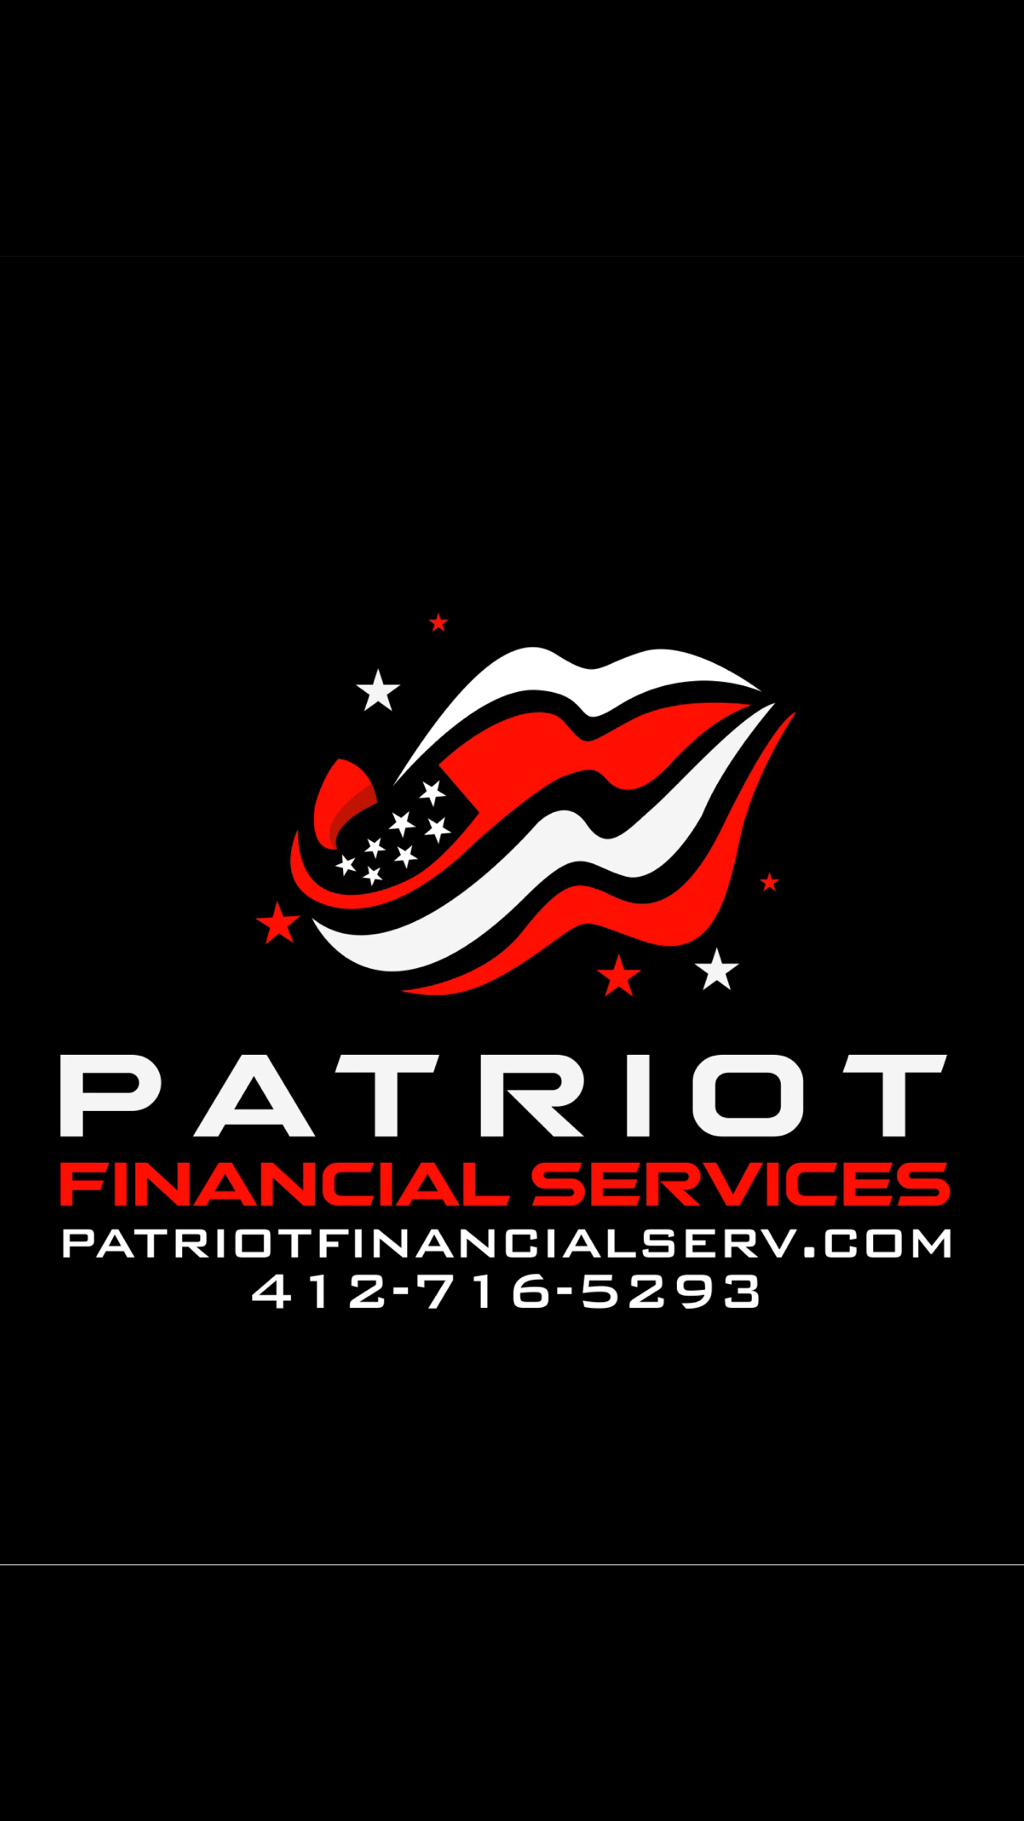 Financial Services Company in Pittsburgh